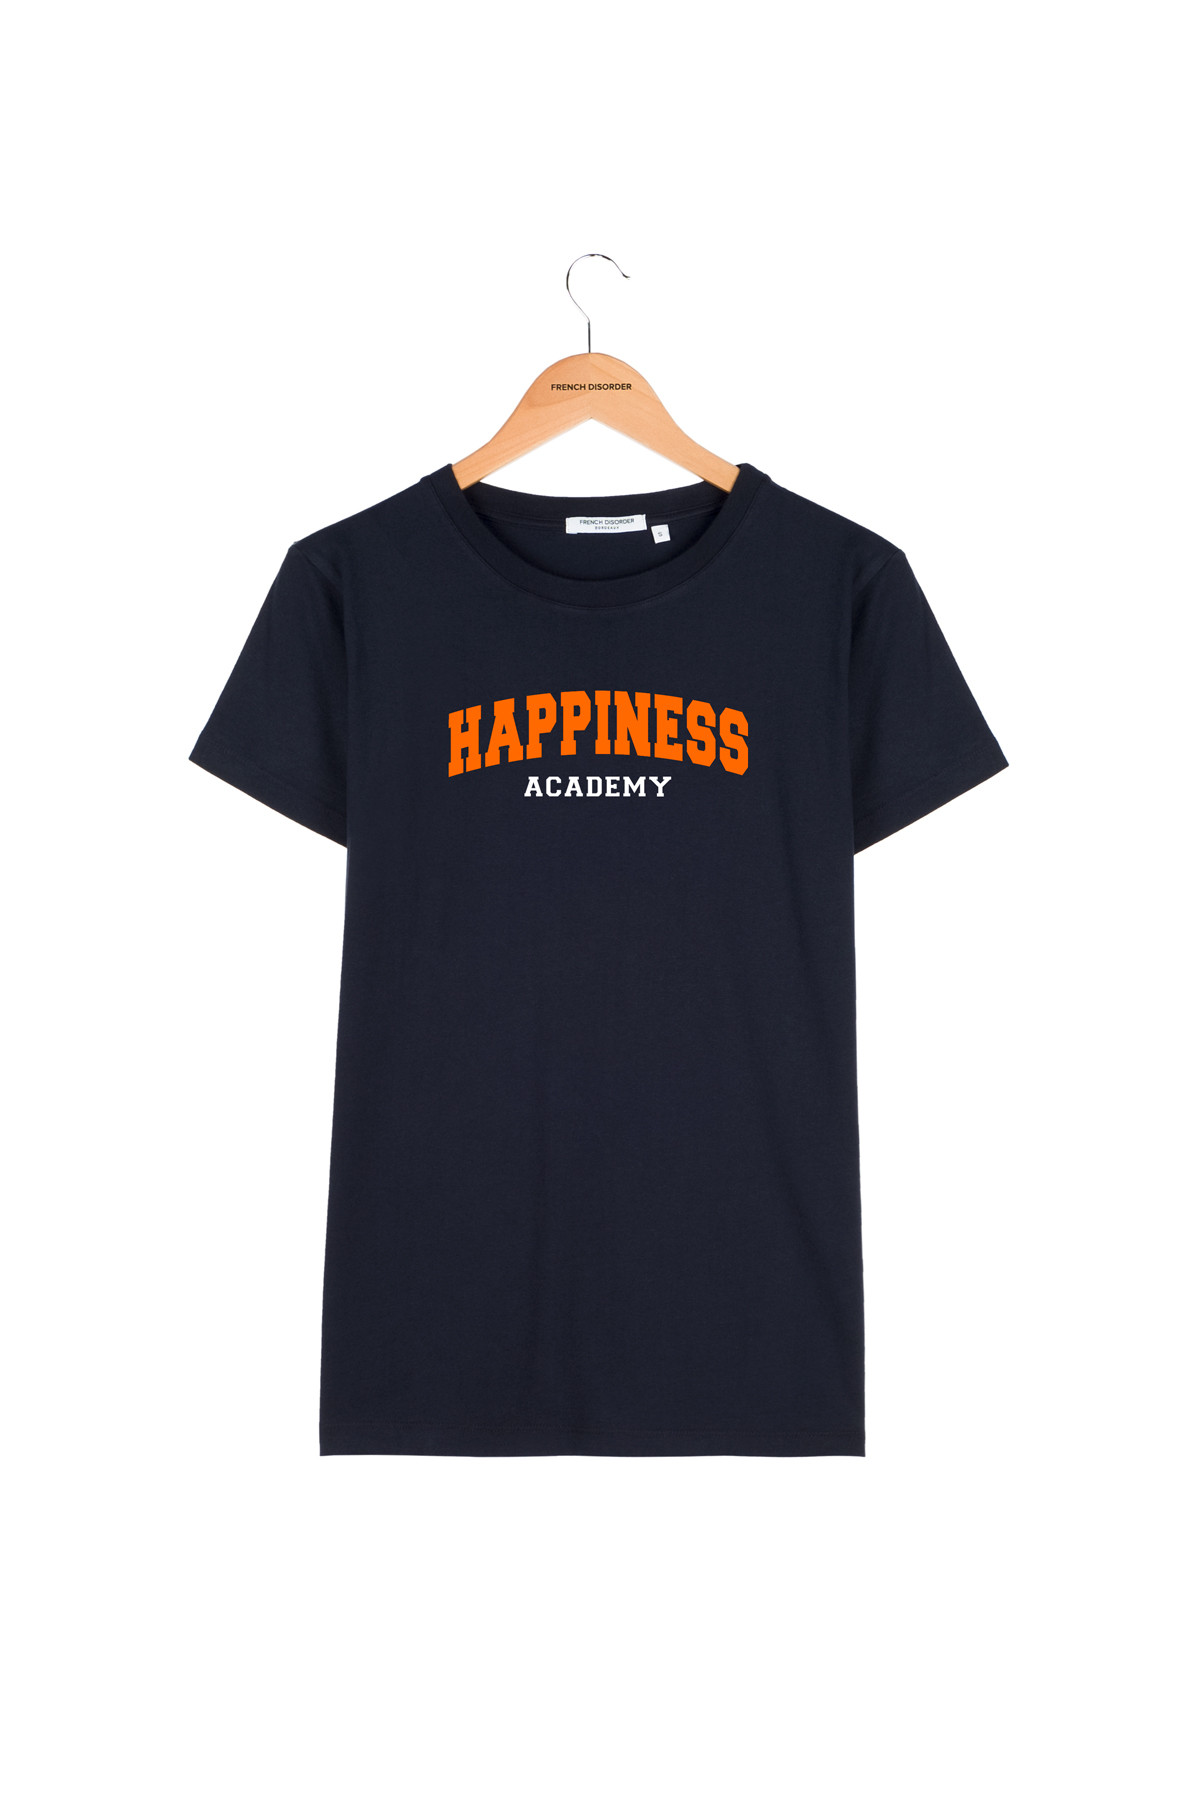 T-shirt HAPPINESS ACADEMY French Disorder